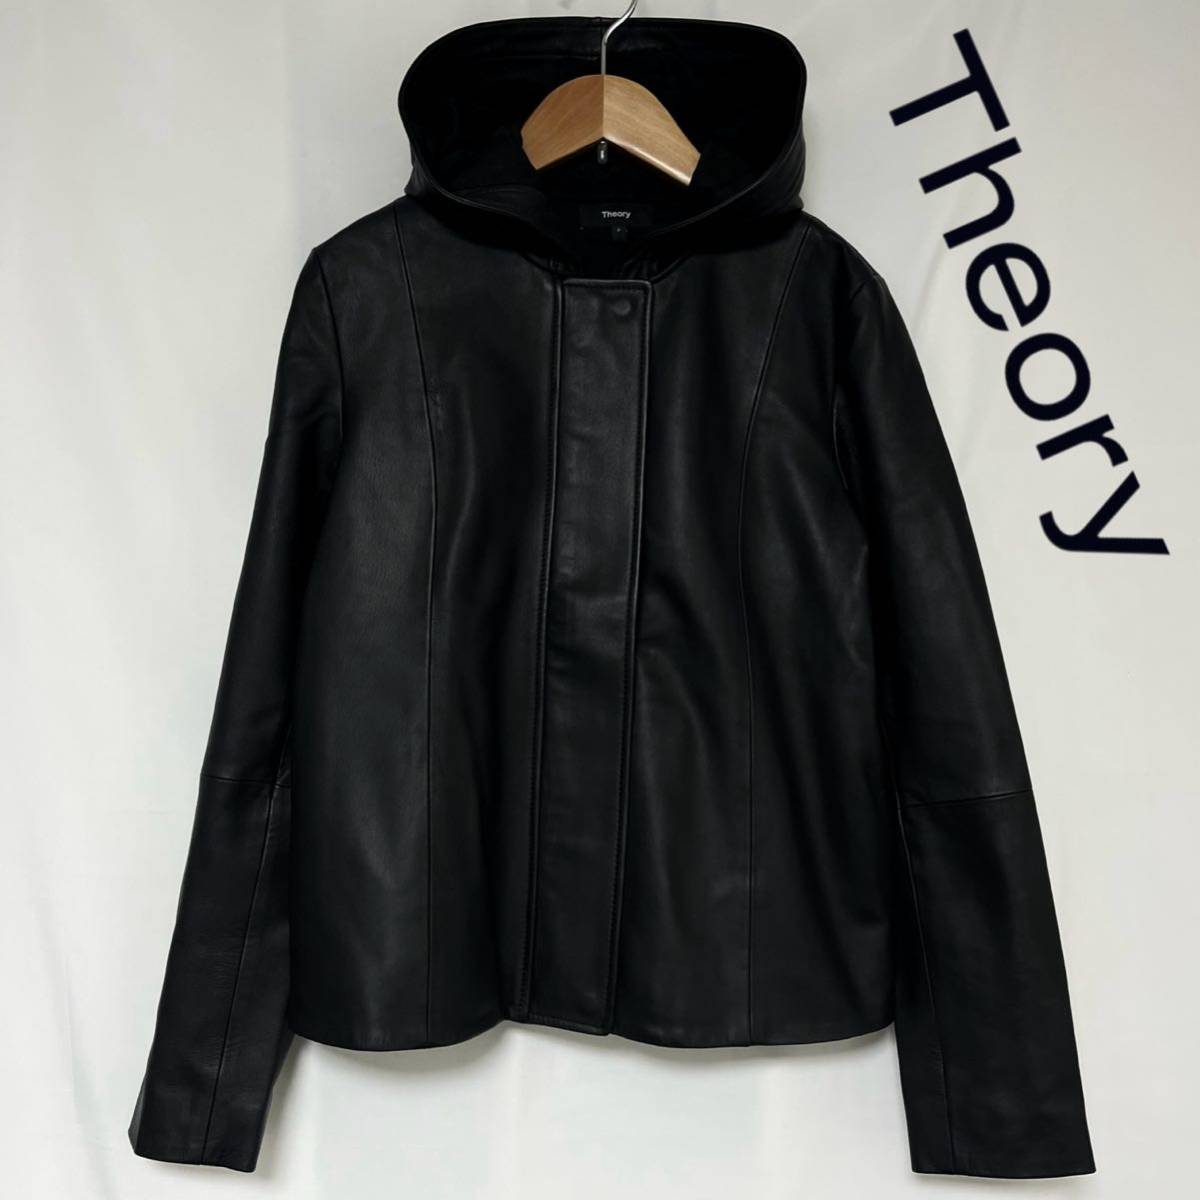 Theory theory SOFT LEATHER ZIP UP JKT leather original leather f-ti- jacket 2021 year of model lady's blouson XS S black black 